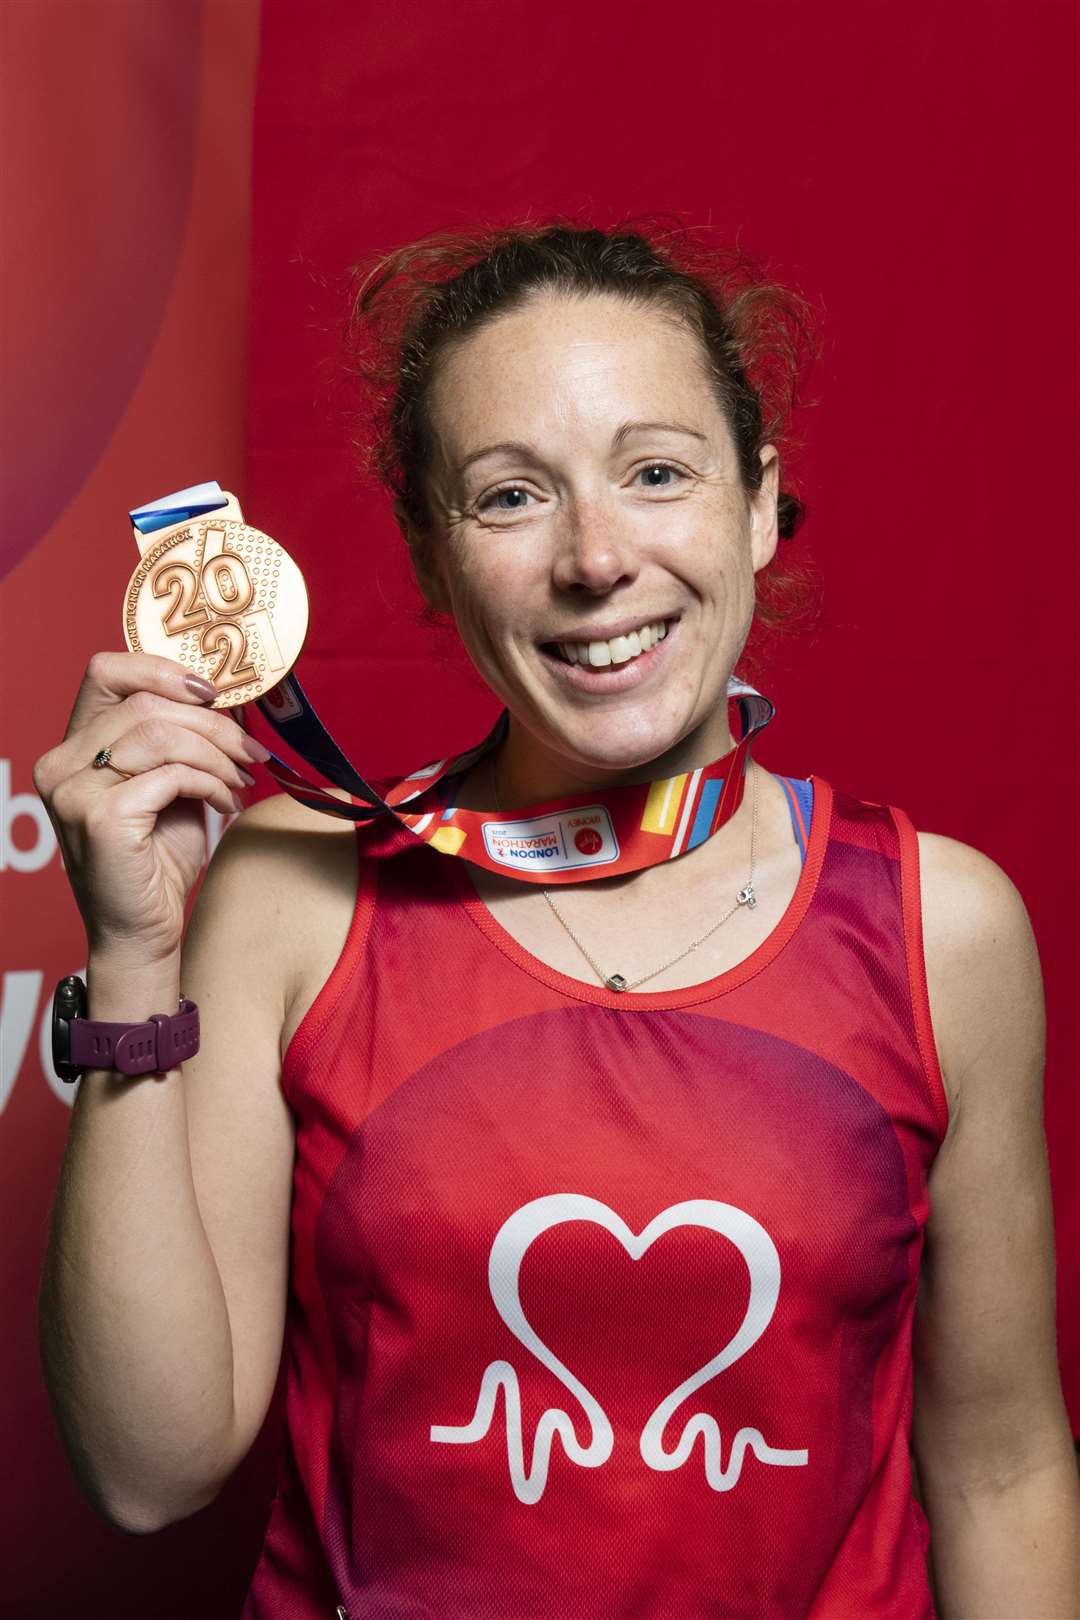 Ruth Pirie commpleted the London Marathon as part of the BHF fundraising team